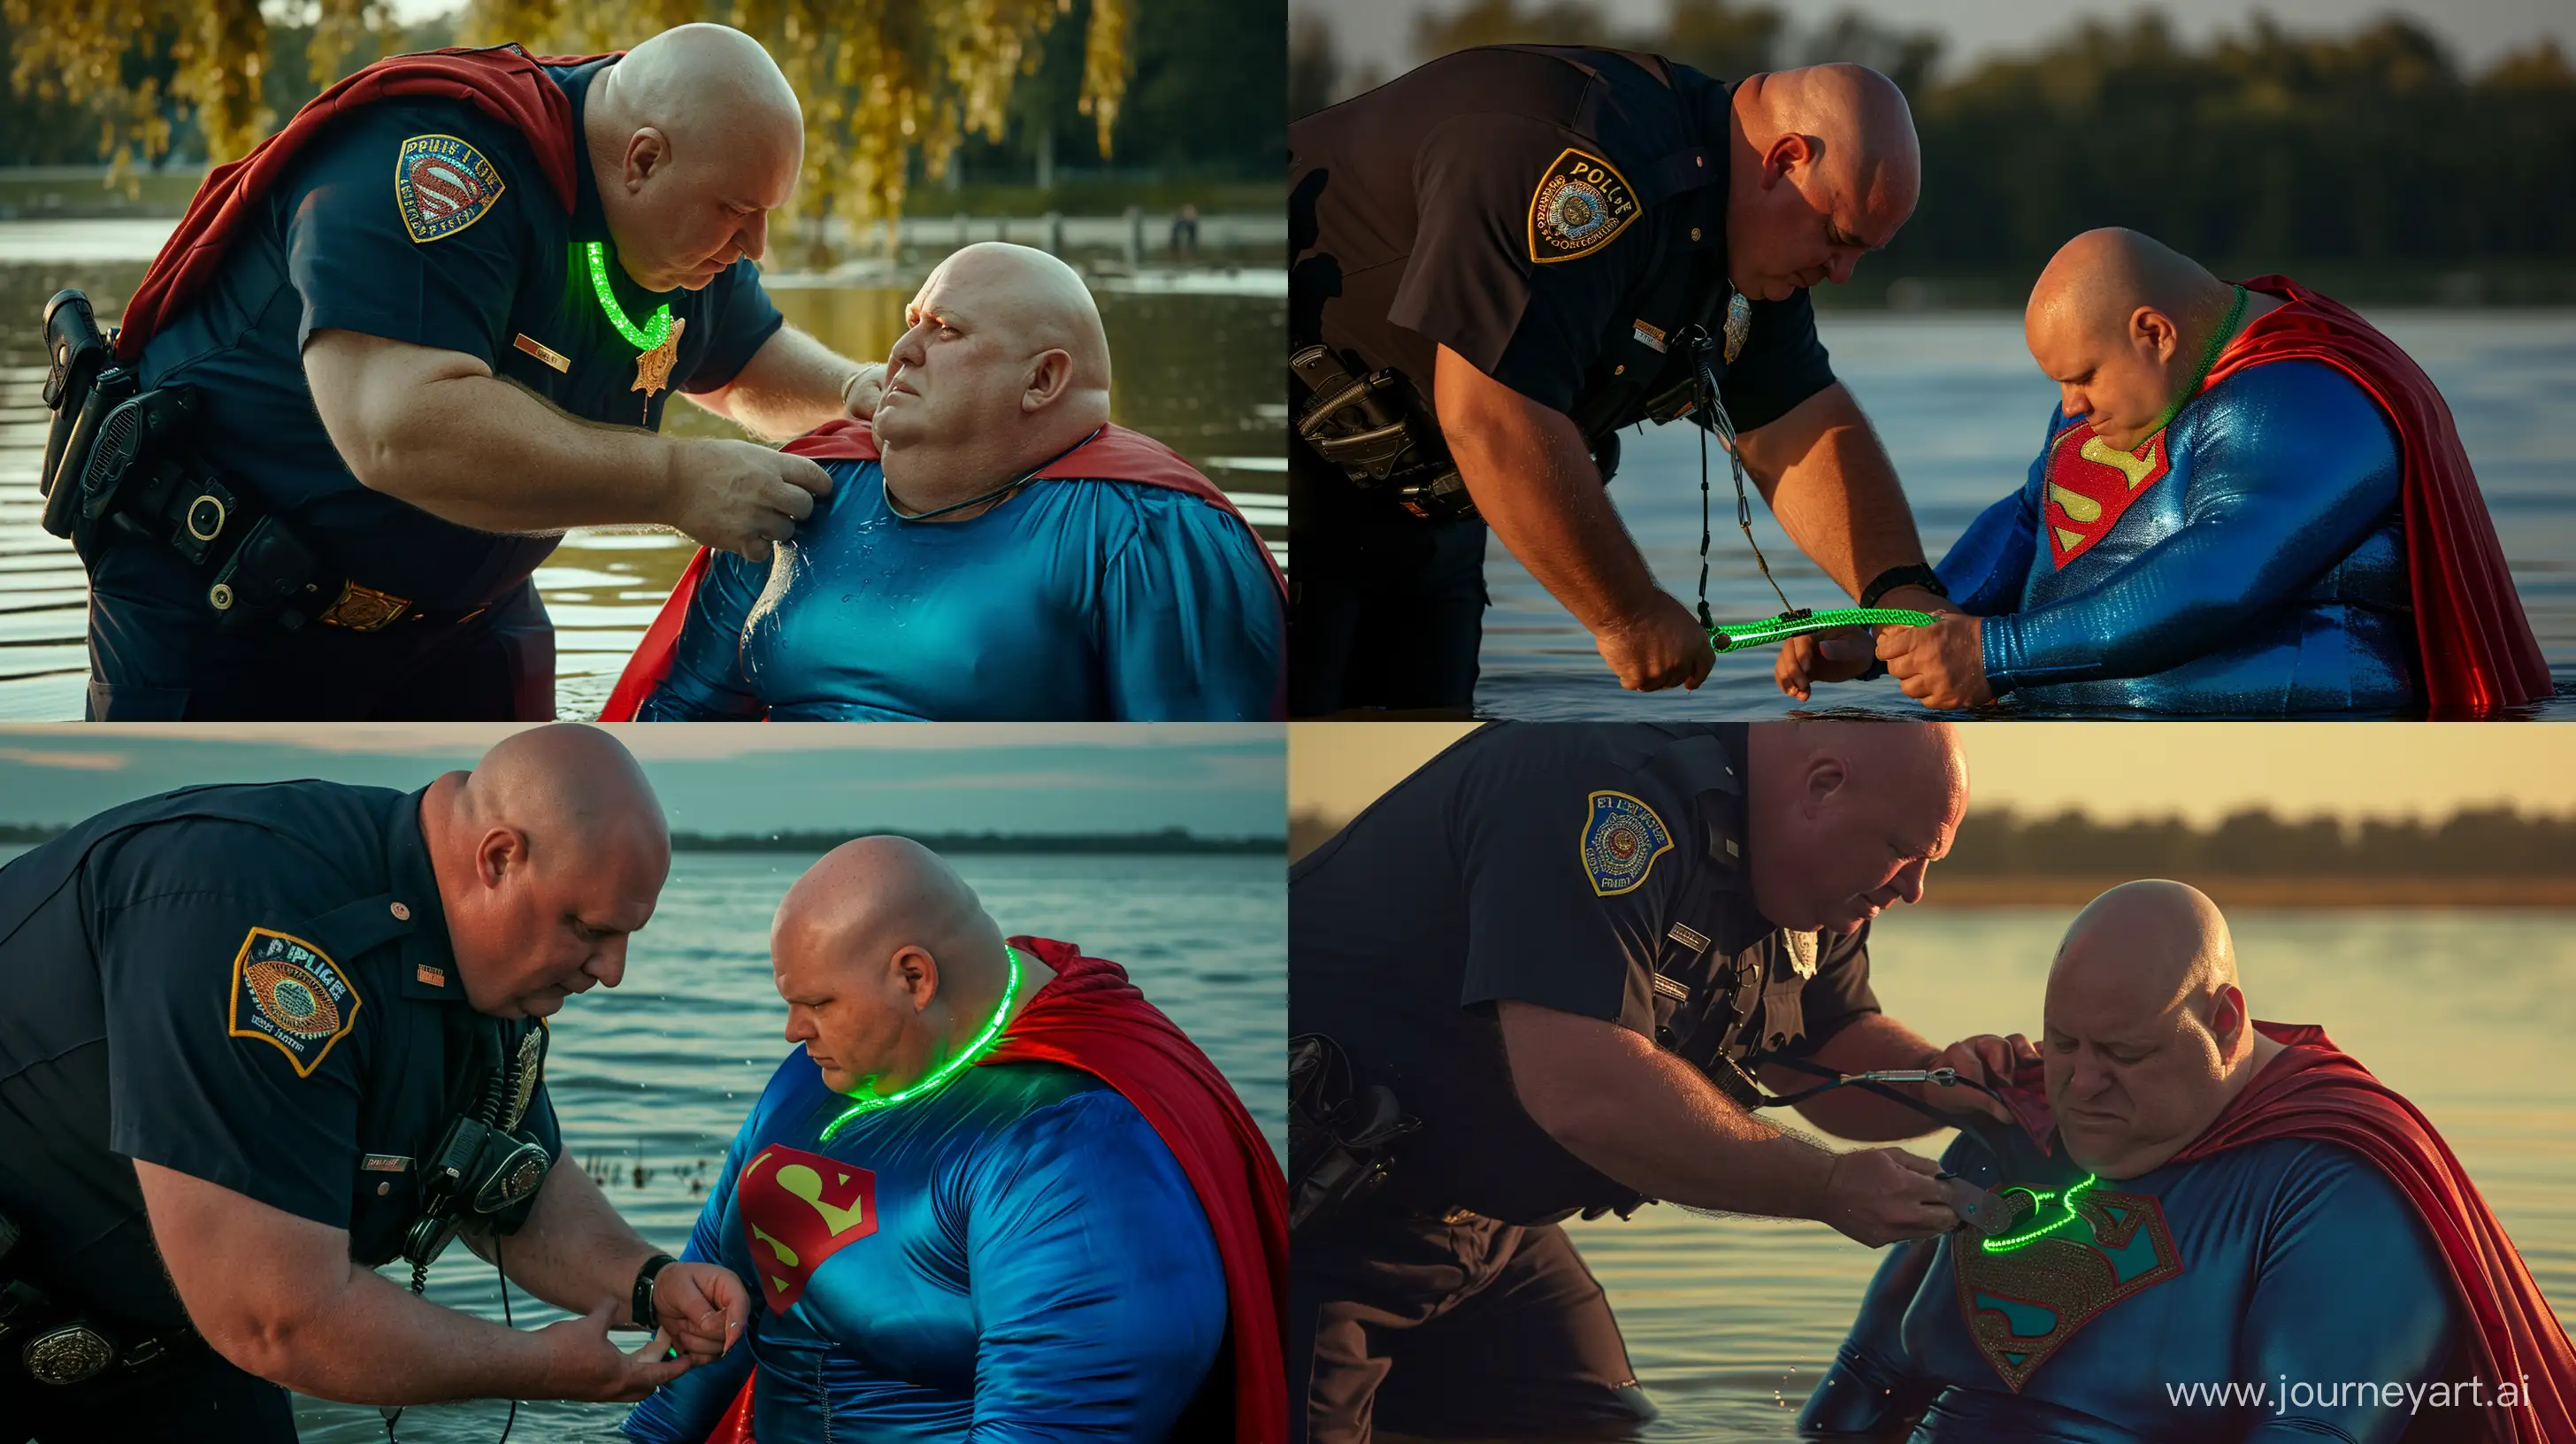 Eccentric-Water-Scene-Chubby-Men-Police-Uniforms-and-Superman-Capes